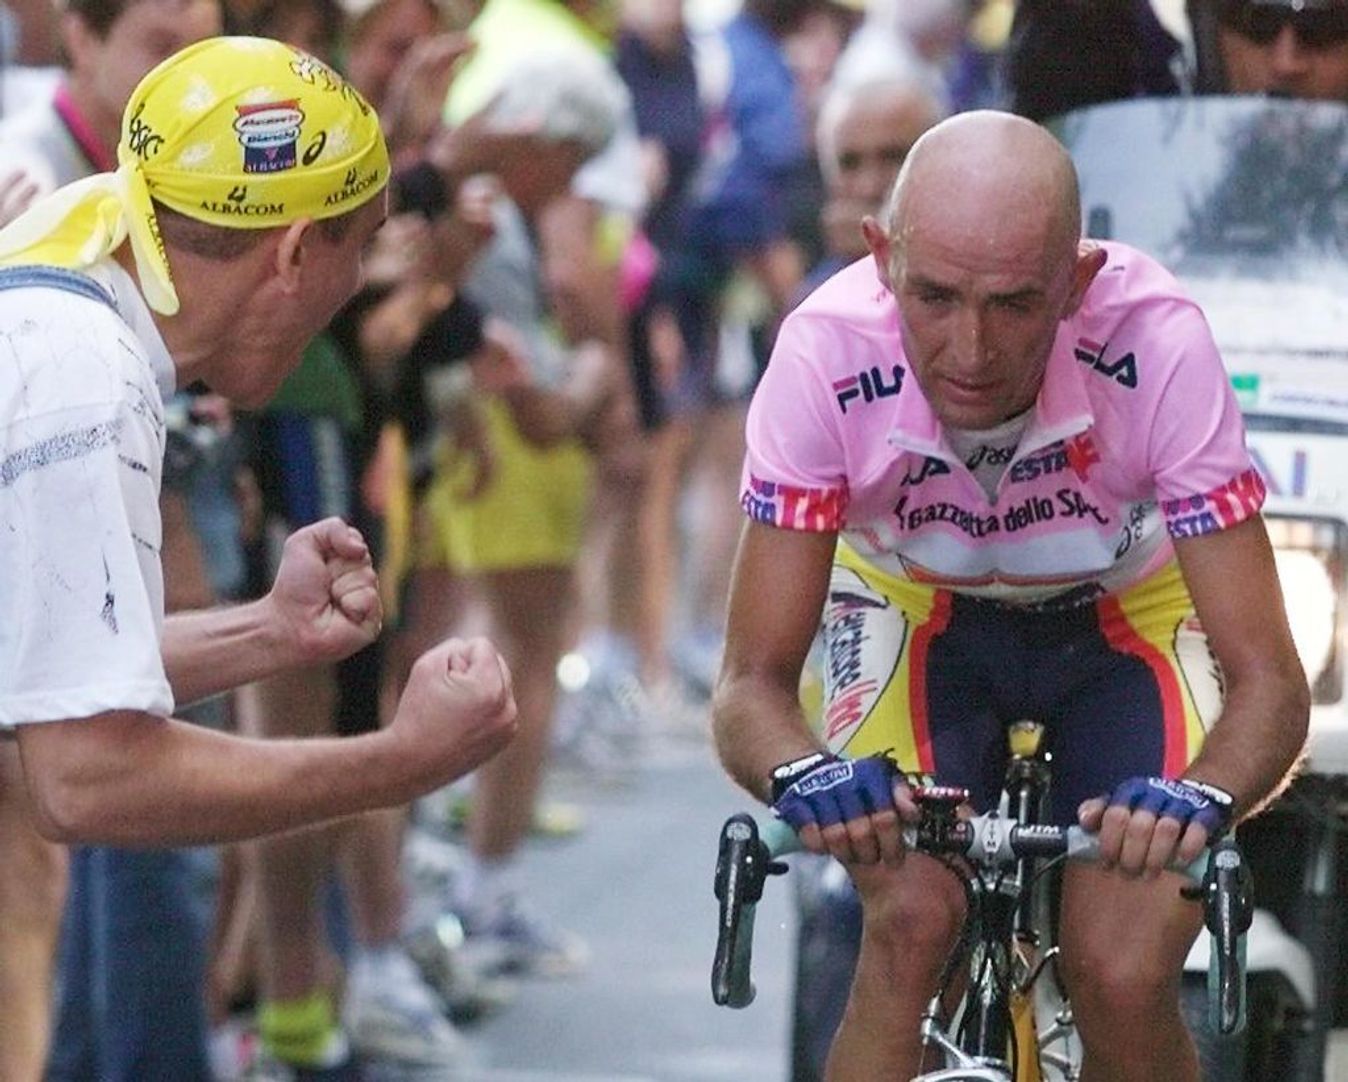 Marco Pantani on his way to winning at Oropa in 1999